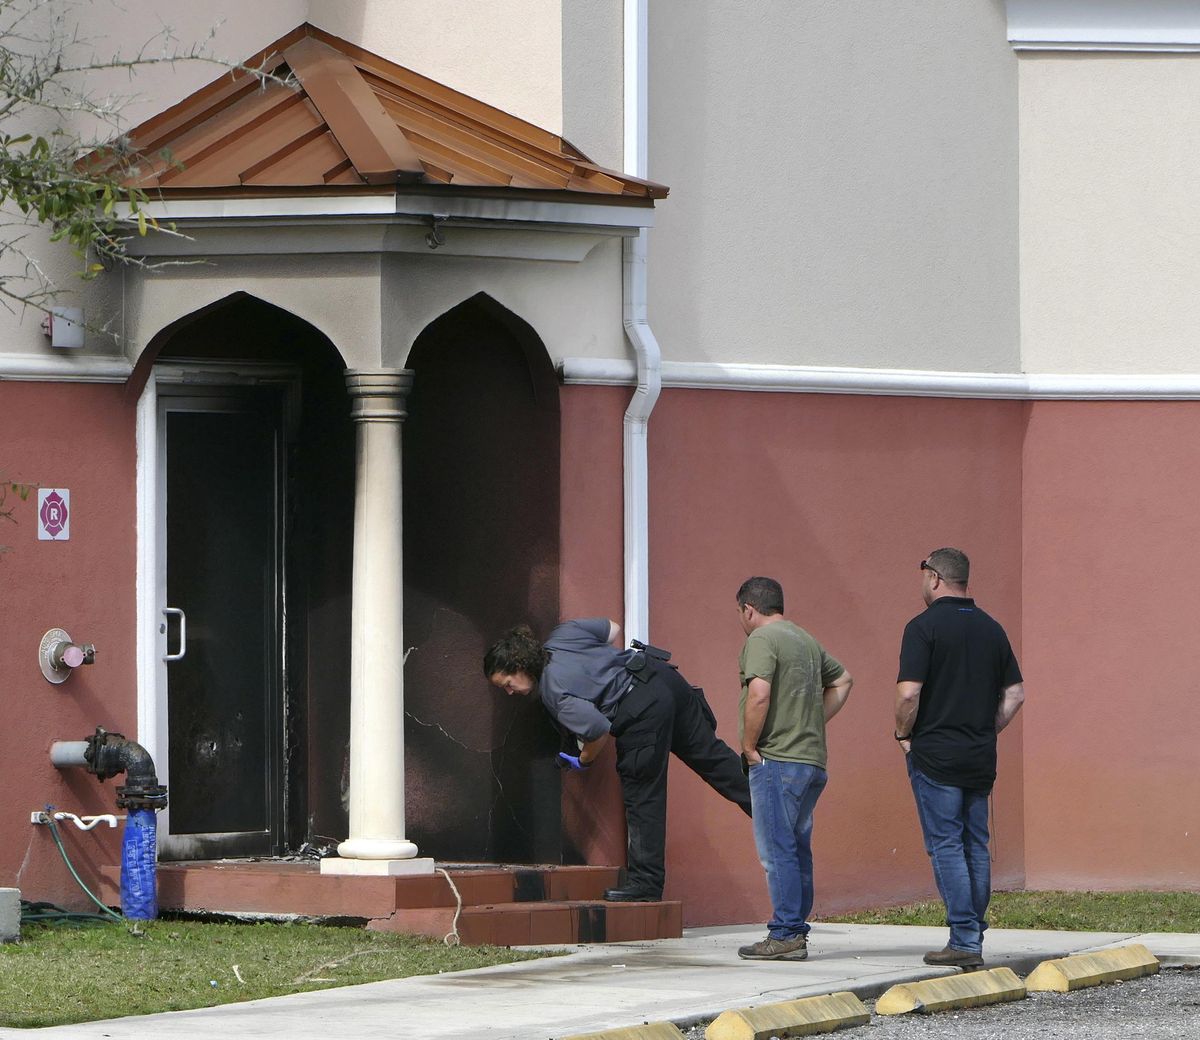 Fire officials inspect a side door where an arson took place at the Daarus Salaam Mosque in Thonotosassa, Fla., Friday, Feb. 24, 2017. (James Borchuck / AP)